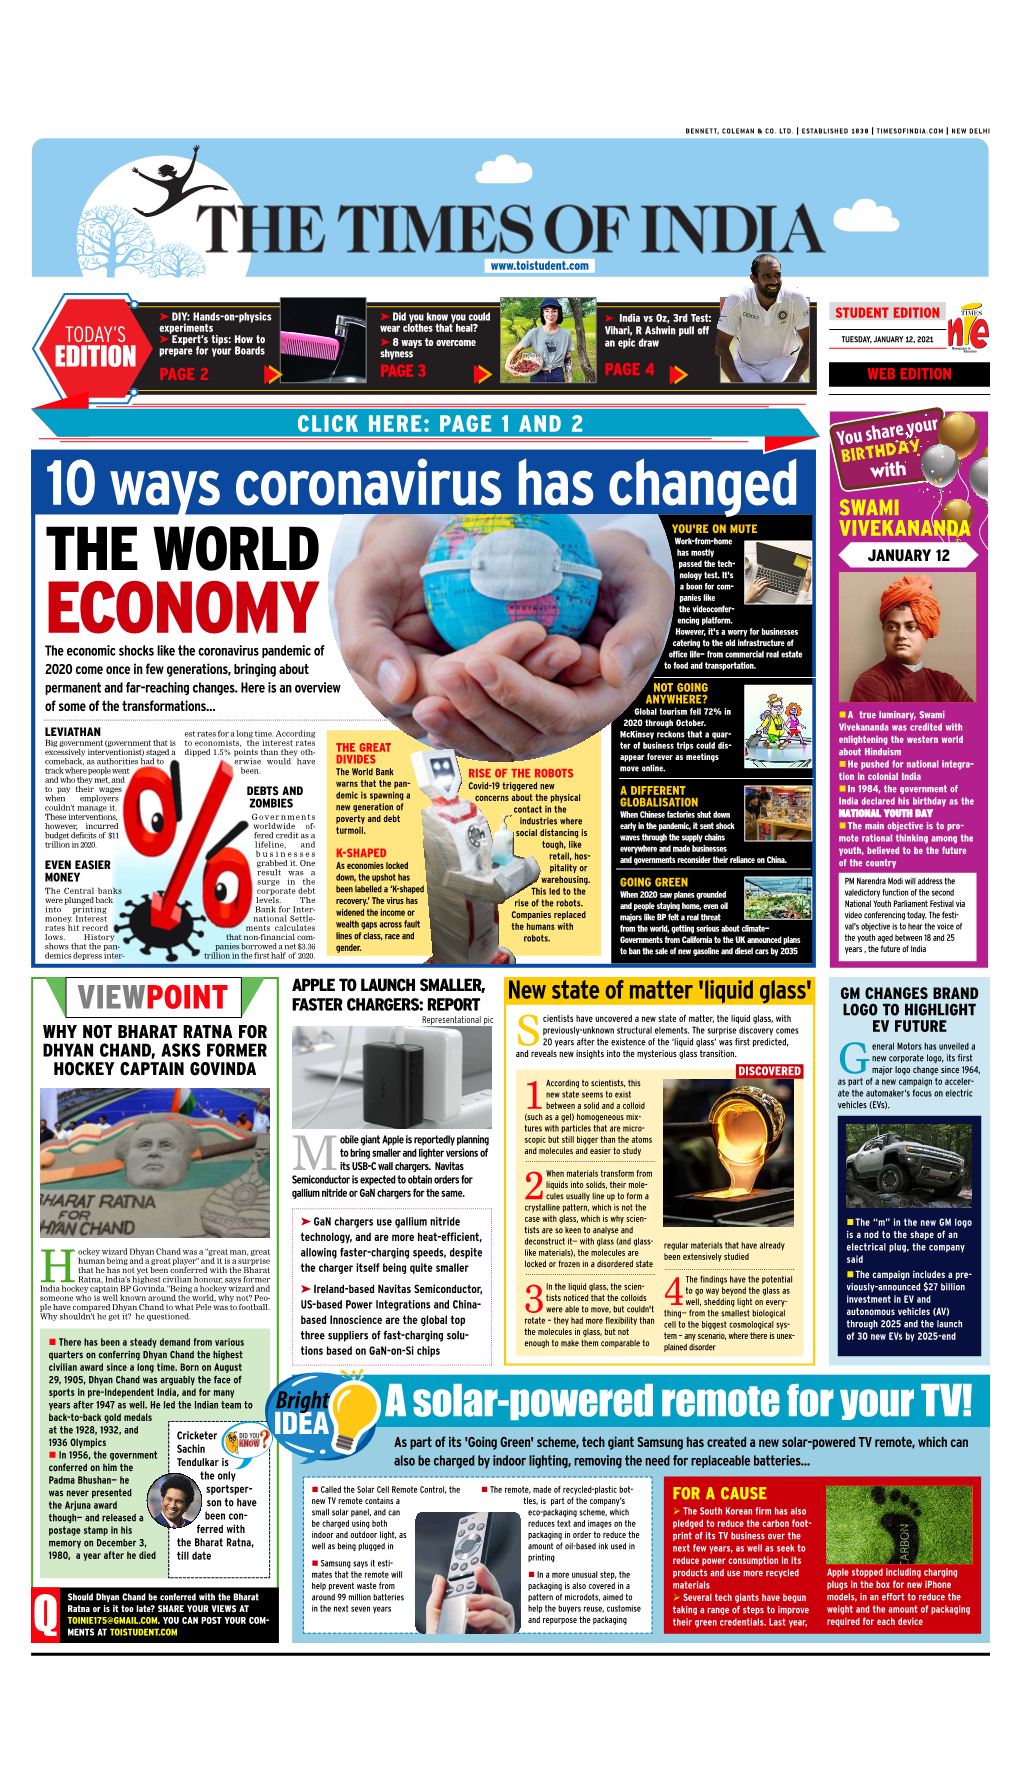 10 Ways Coronavirus Has Changed SWAMI YOU're on MUTE VIVEKANANDA Work-From-Home Has Mostly Passed the Tech- JANUARY 12 the WORLD Nology Test